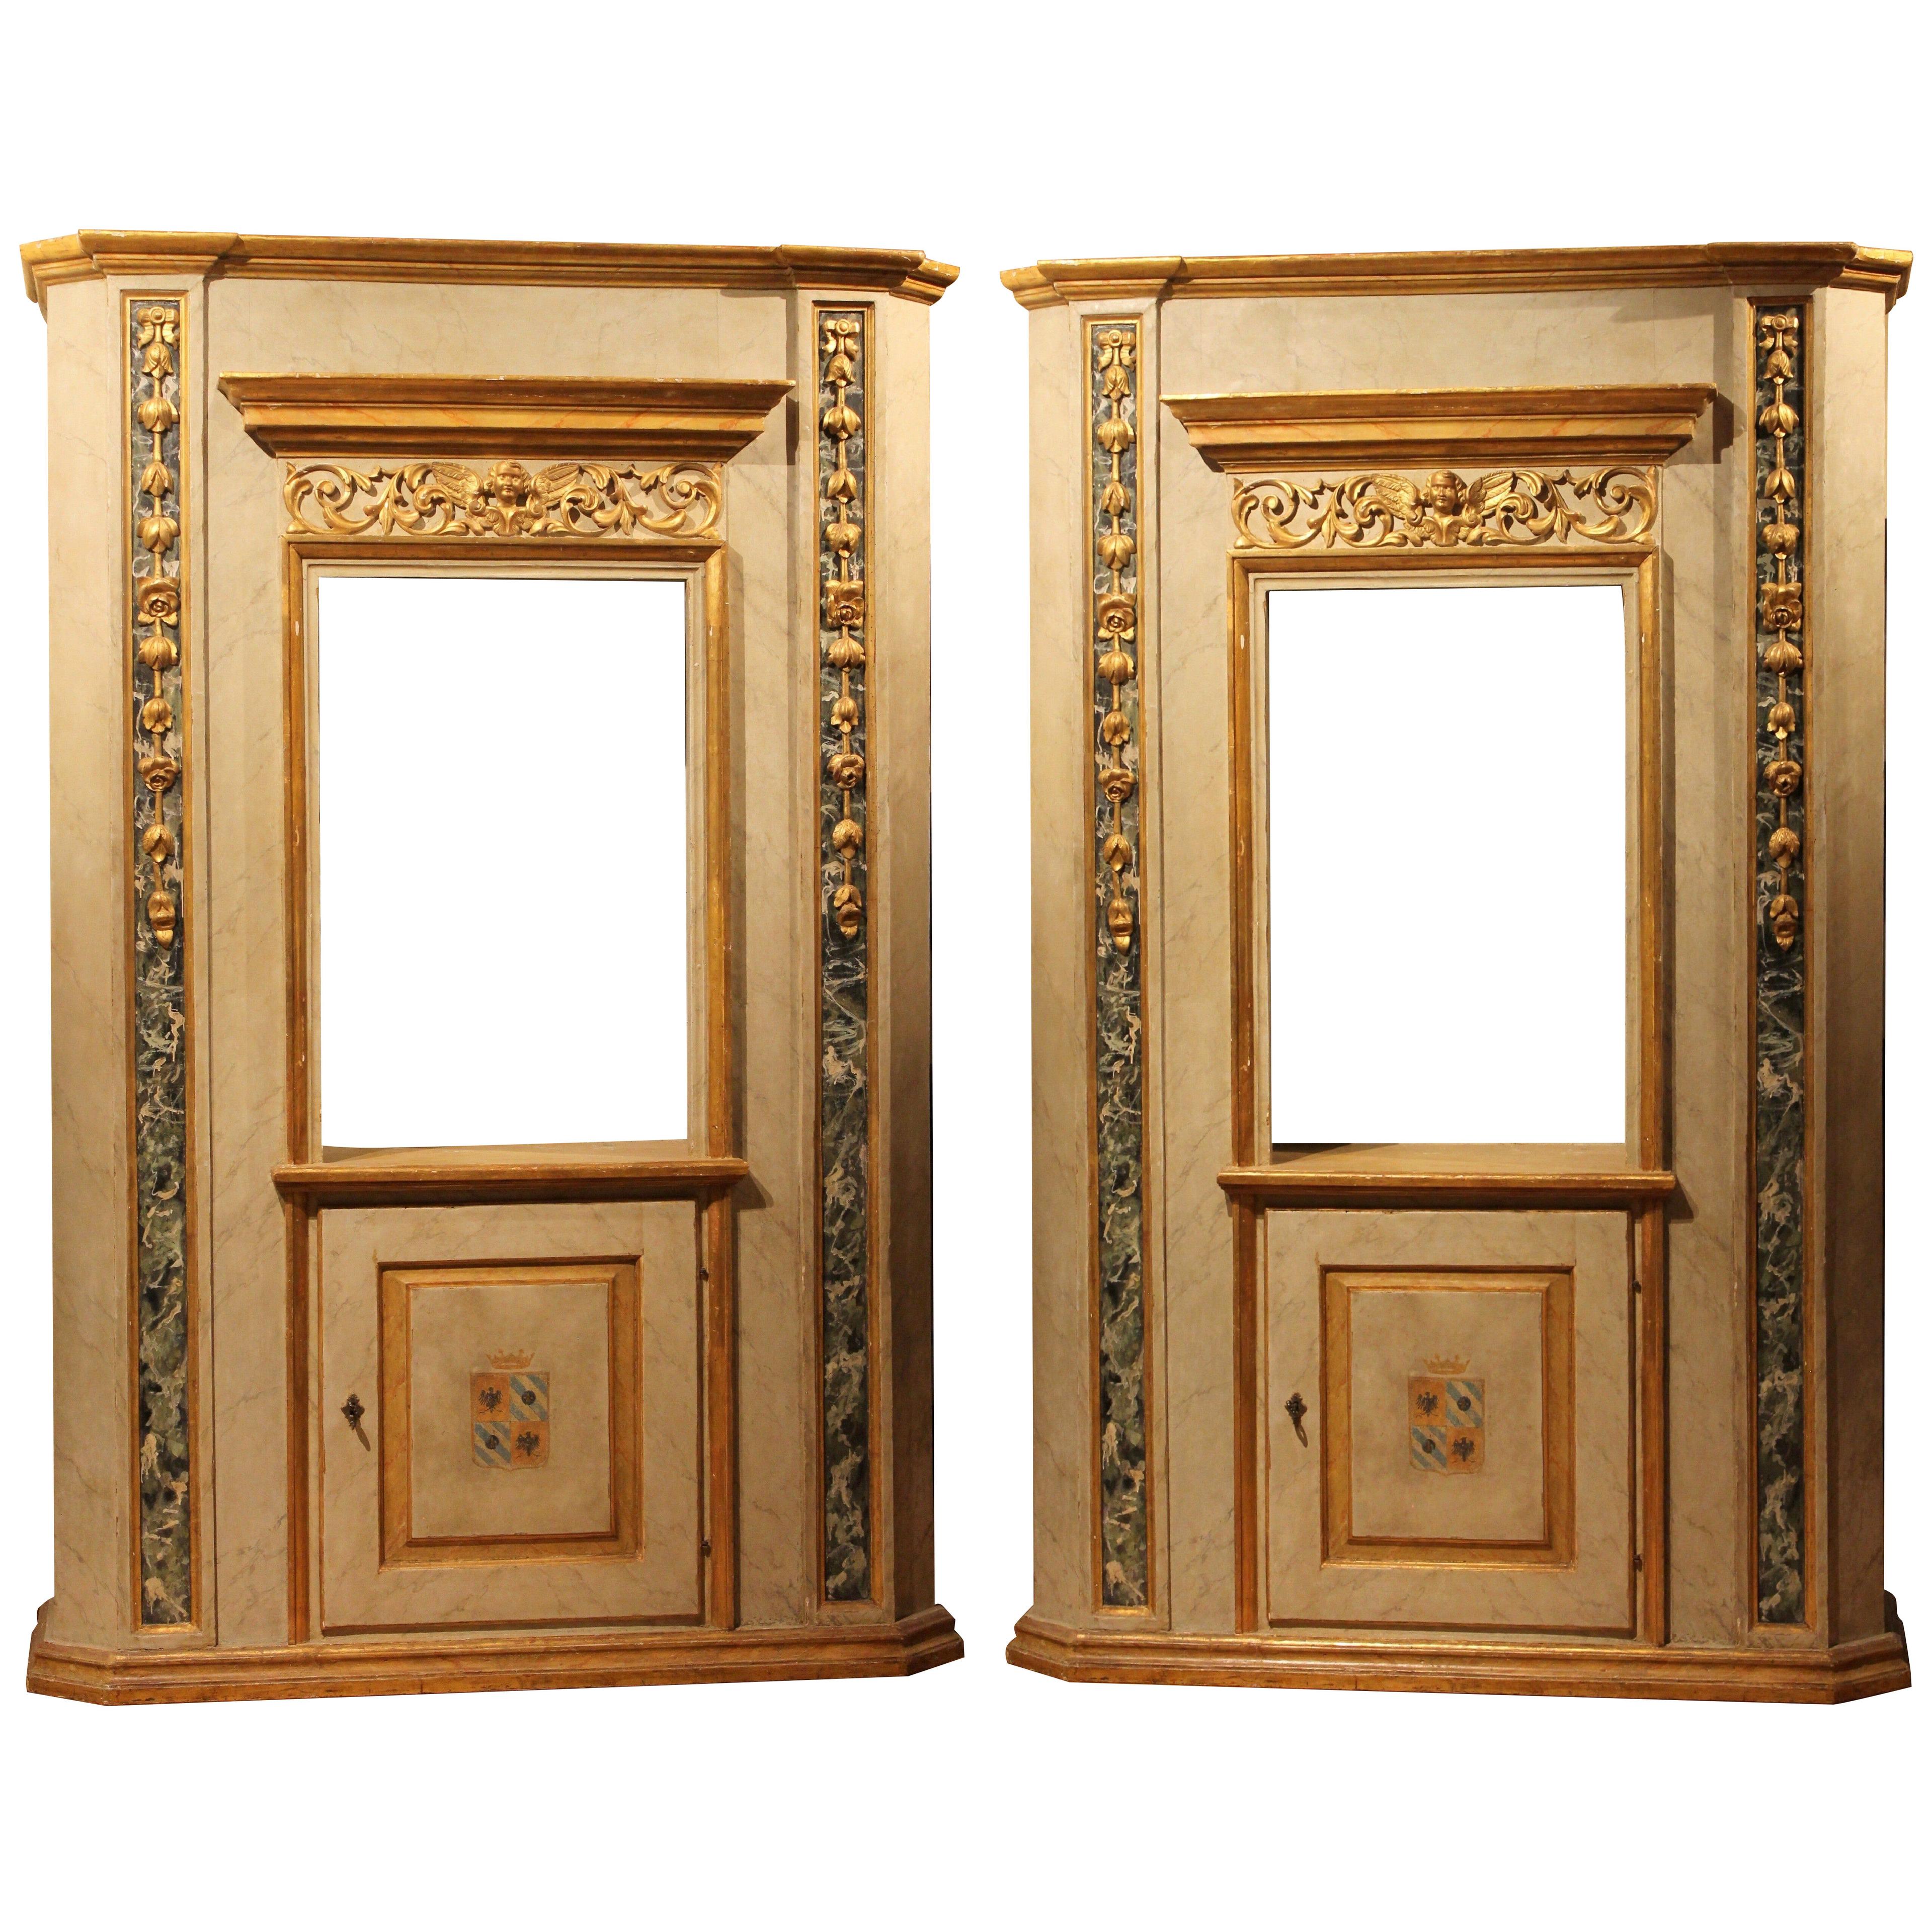 Italian Neoclassical Faux Marble Lacquer and Giltwood Open Shelves Cabinets